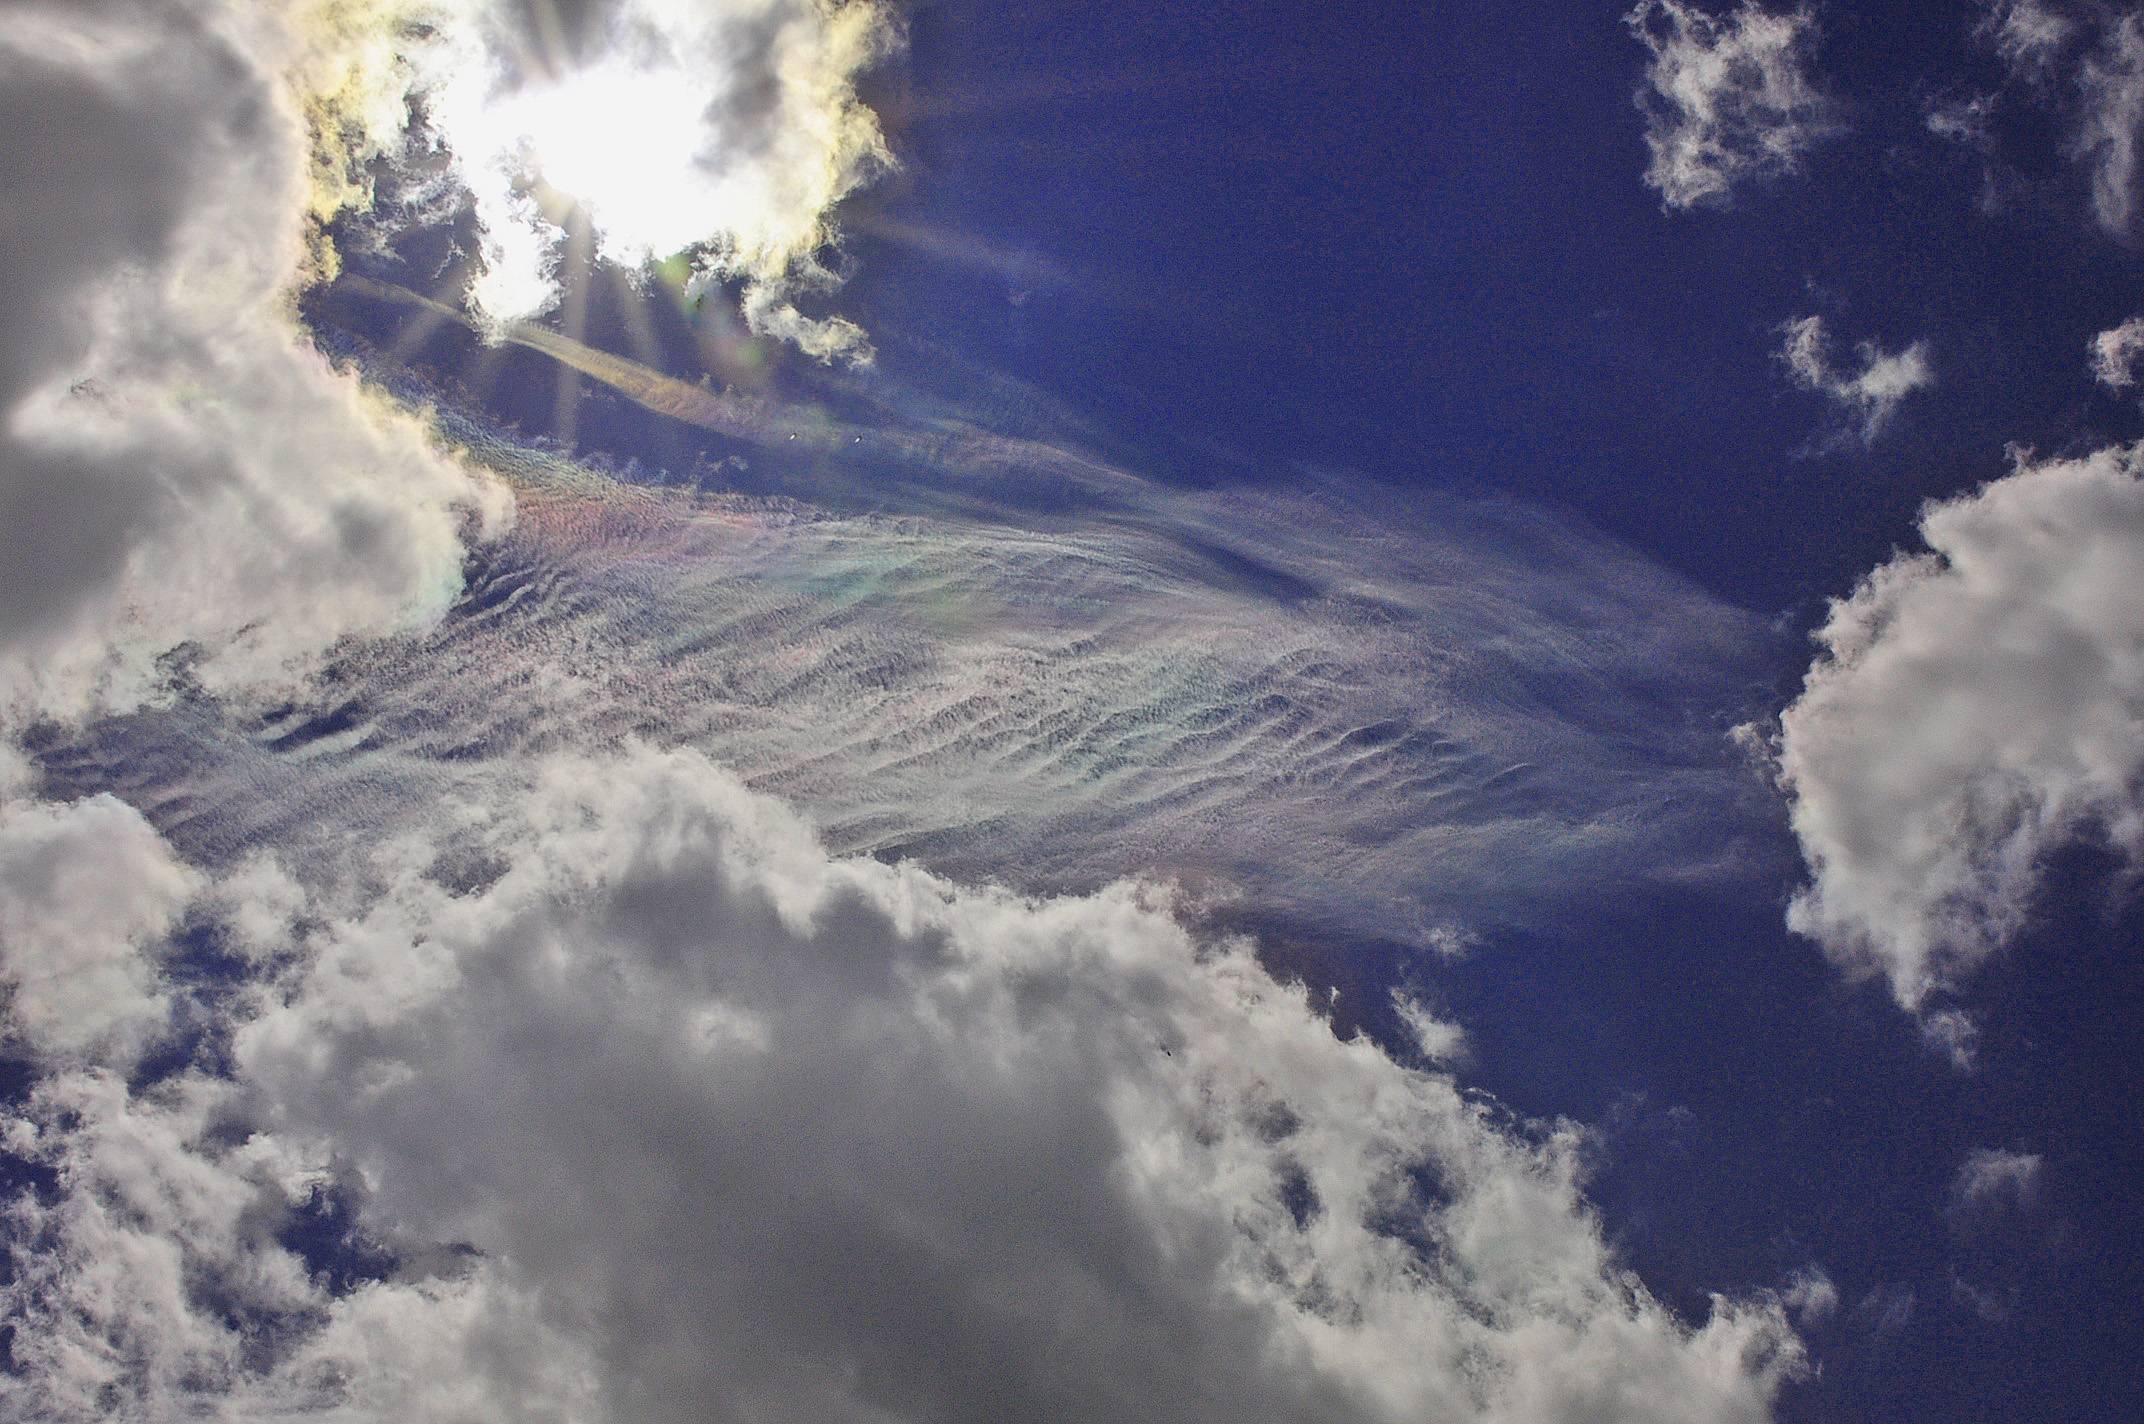 Nacreous clouds over Valle d'Aosta: 406 KB; click on the image to enlarge to 2000x1328 pixels